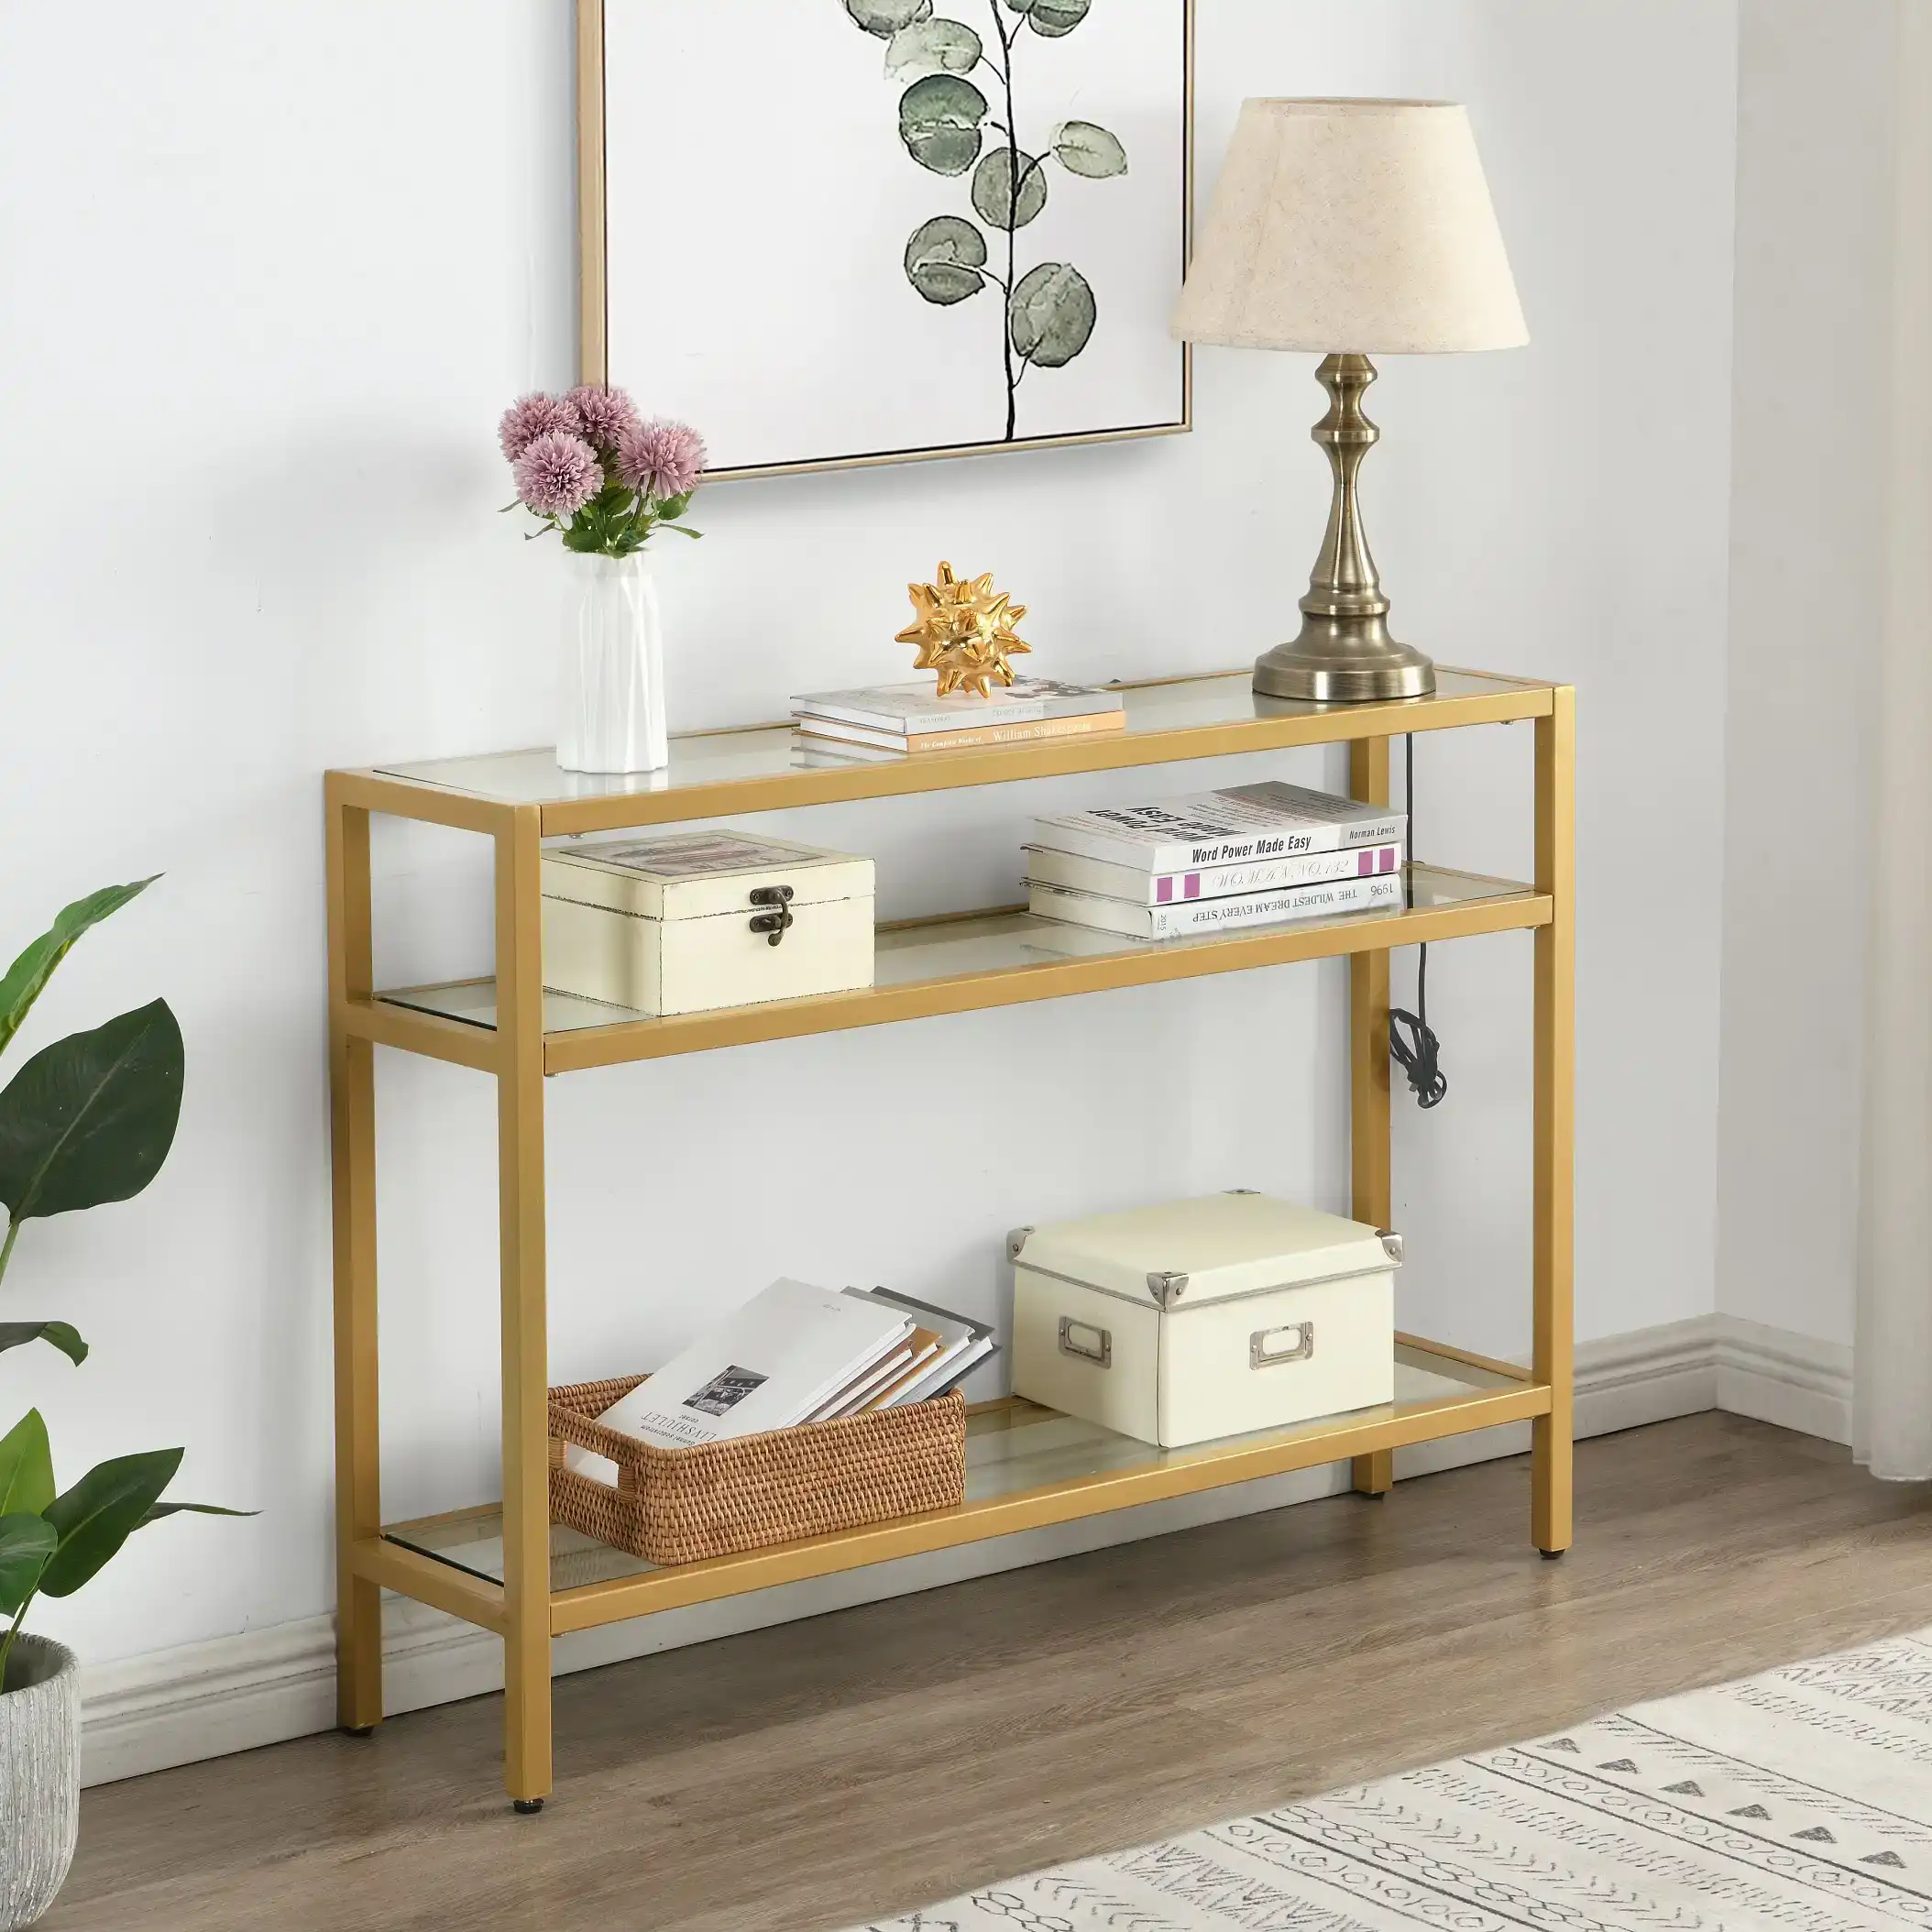 HLIVING Modern Glass Console Table, Entryway Table with 3 Tiers Storage Shelves, Gold Finish